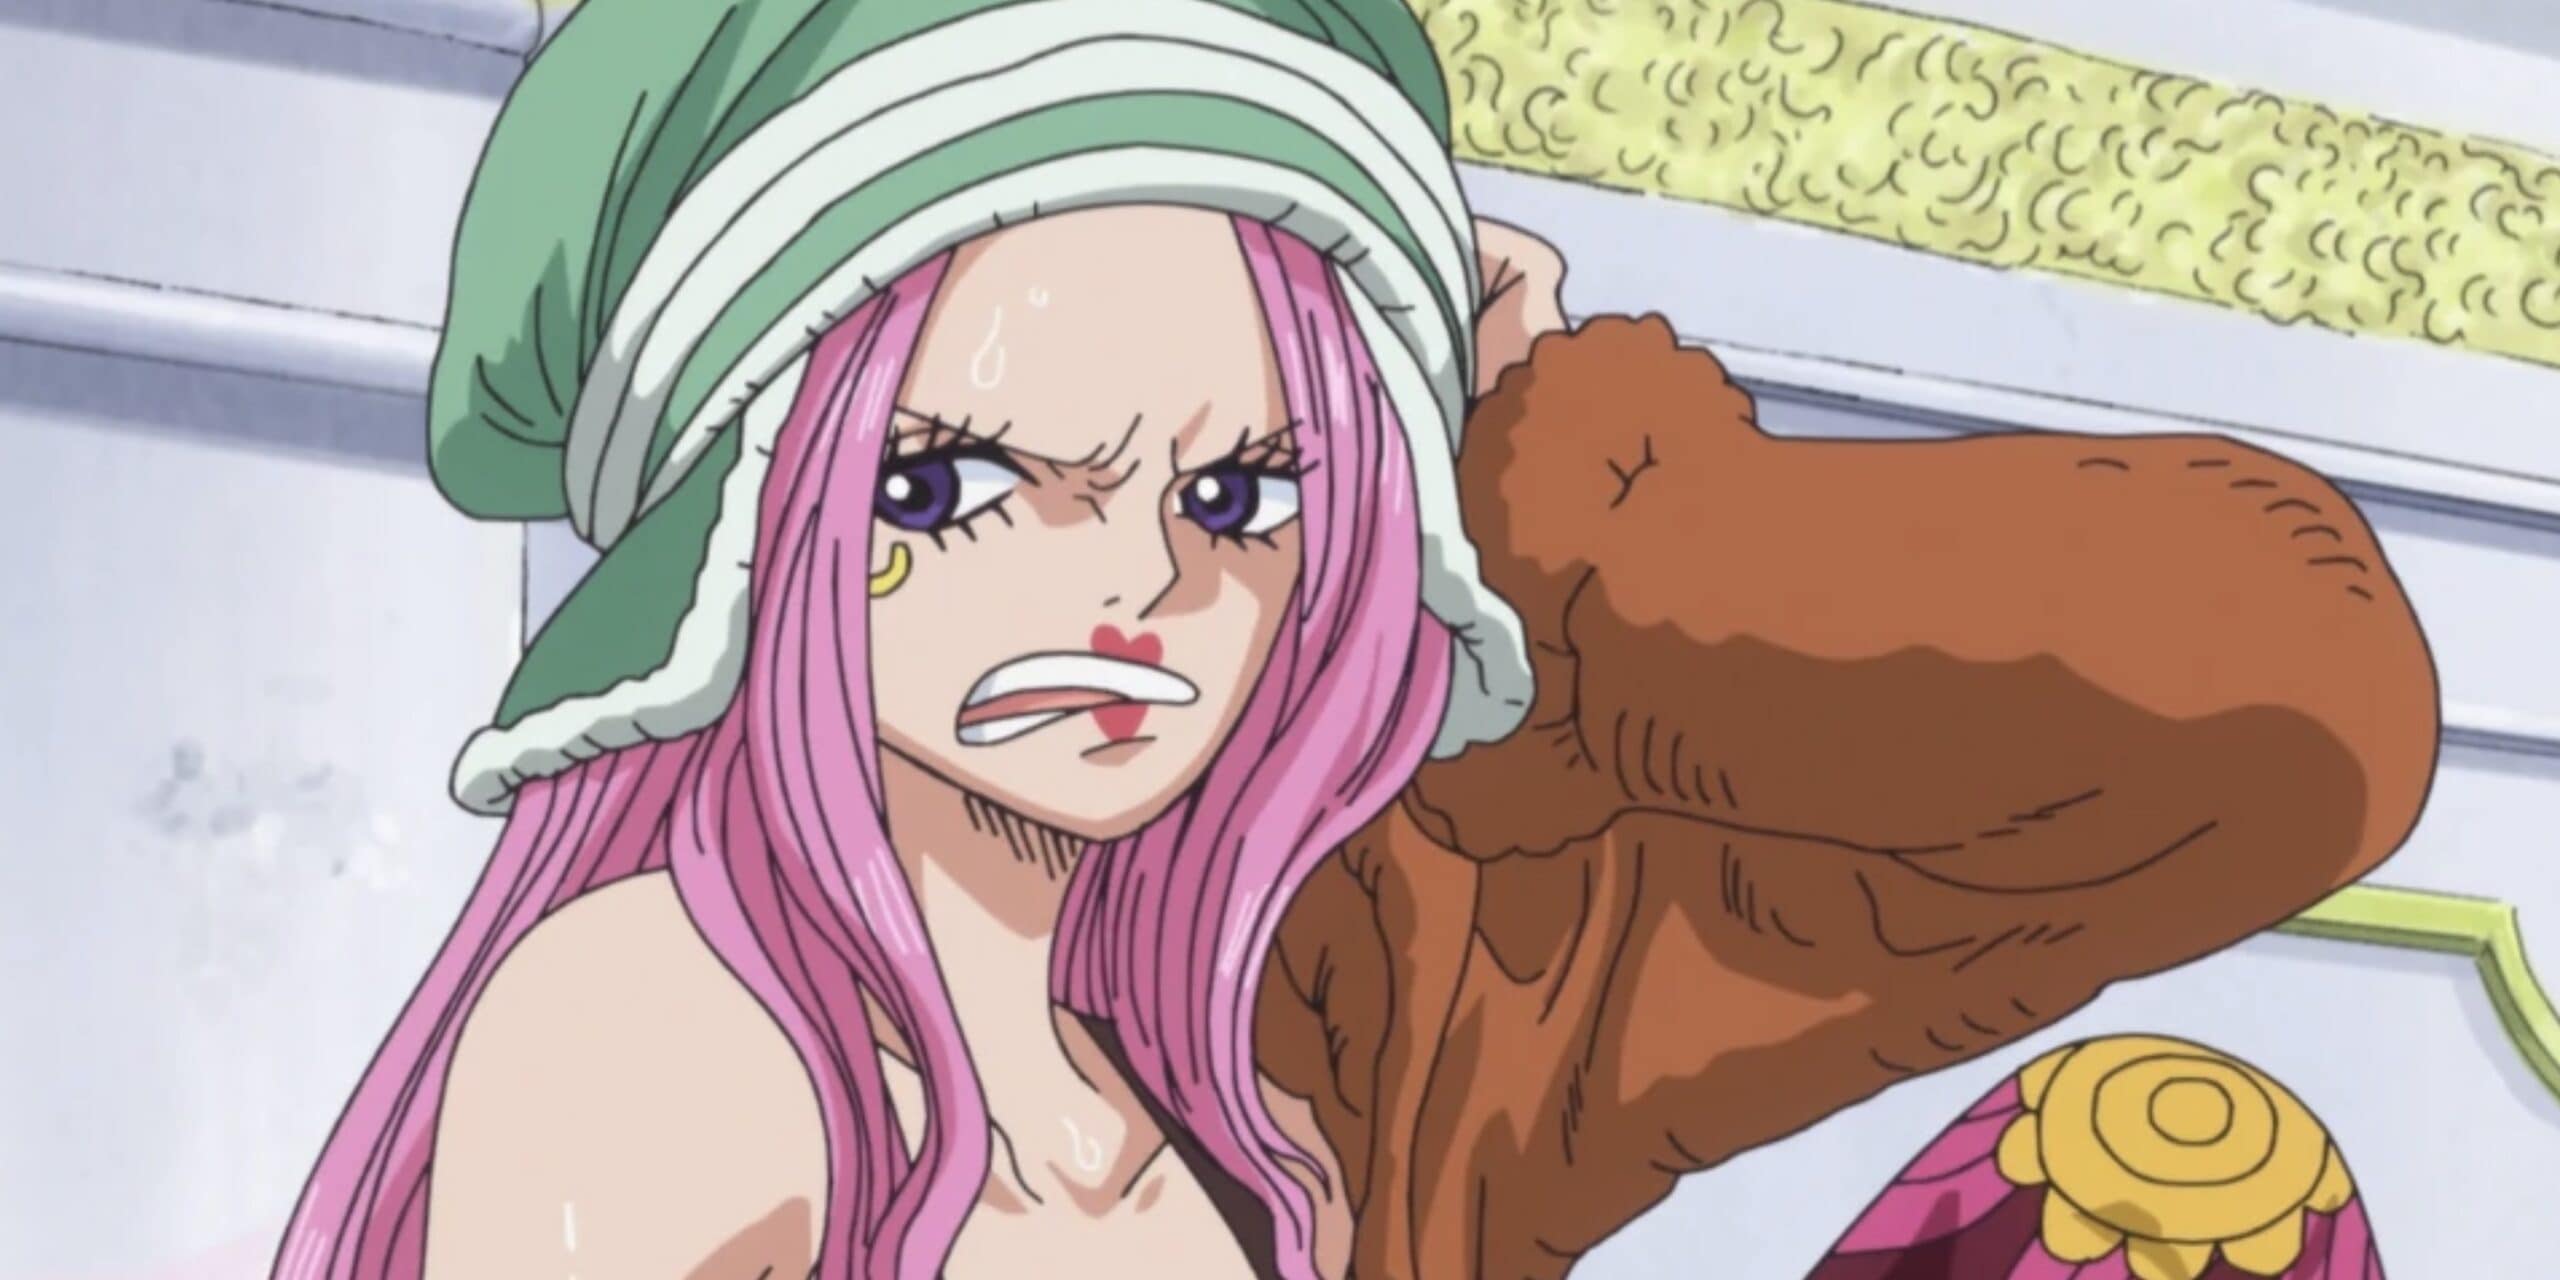 After witnessing Kuma's tragic memories, Bonney is overcome with emotion. She emerges from the room and apologizes to Vegapunk for her outburst. In a touching gesture, Vegapunk gives Bonney a sapphire sun necklace that was intended as Kuma's 10th birthday gift.  In the present-day battle, Bonney attempts to utilize a Nika-style attack on Saturn similar to Luffy's abilities. However, the technique fails and Bonney feels drained of energy. Saturn deduces that the Nika Bonney knows must be different than the true Joyboy. As a result, Bonney can only mimic the basic rubber properties. Meanwhile, the rest of the crew remains immobilized by Saturn's immense power. One Piece (Credits: Eiichiro Oda) The story then shifts to the Kamabakka Kingdom where Dragon converses with Emporio Ivankov. He inquires where Kuma would naturally be inclined to go based purely on instinct. Ivankov responds that he would return to Marijoa, but emphasizes that Kuma is now a completely changed man. Back on Egghead, Luffy begins eating scraps of food found on the floor despite being mid-battle. Witnessing this lapse in focus, Saturn orders his subordinates to restrain Luffy in the sea prism stone. One Piece (Credits: Eiichiro Oda) We also uncover that Bonney originally gained her age manipulation abilities from the Toshi Toshi no Mi Devil Fruit that was artificially engineered by Saturn. Apparently, he has a long history of conducting human experiments to gift powers without requiring the consumption of real fruit. One Piece (Credits: Eiichiro Oda) This all connects back to the potential insight that many readers overlooked during the initial release. Oda subtly interweaves critical backstory alongside the chaotic action. Kuma Used Haki, The Theory About Free Will It is revealed that Saturn had previously given Bonney the Toshi Toshi no Mi Devil Fruit through experimental medicine. However, as an unintended consequence, she also contracted the devastating Sapphire Scale Disease. Shockingly, Saturn failed to anticipate that both the power and illness could be hereditarily passed to Bonney. He further explains that Bonney's abilities enable her to transform into any potential future self she can envision. However, as she uncovers more of the disturbing truths surrounding her origins, her range of possibilities becomes increasingly constrained by despair. Overwhelmed with grief, Bonney begins doubting the existence of Nika itself. As a result, her Nika-inspired techniques manifest as weaker imitations. She breaks down apologizing to Kuma, feeling hopeless that she will die despite his selfless sacrifice on her behalf. One Piece (Credits: Eiichiro Oda) Just as Saturn prepares to strike down Bonney, Kuma suddenly appears on Egghead Island. He swiftly attacks the Marines surrounding the Straw Hats and shields Bonney by taking Saturn’s blow directly to his back. In an astonishing display of agency, Kuma then forcefully grabs hold of Saturn’s leg with his bare hand. Visibly enraged, Kuma winds up a punch with Haki-imbued fury directed at Saturn as the chapter concludes on a cliffhanger. One Piece (Credits: Eiichiro Oda) This scene indicates that despite Vegapunk’s modifications, Kuma retained traces of his past identity and willpower. The utilization of Haki and raw emotion are defining human qualities that were never exhibited by Kuma as a Pacifista. Therefore, many readers may have too quickly assumed him to be fully robotic rather than speculating on the possibility of regained memories. Oda masterfully subverts expectations once again! What Fans Think About This Theory Since the start of the Egghead arc, Oda has repeatedly emphasized how Vegapunk struggles to ever fully eliminate the intrinsic "will" or personality from his creations, no matter how advanced the modifications. One Piece (Credits: Eiichiro Oda) We observed this with the defiant sea beasts mechs. We saw glimpses of it in S-Snake's behavior. And now again prominently with Kuma. Many believe Kuma is simply reverting to act on encoded instincts - namely, his undying devotion to protecting Bonney based on their paternal bond. Looking even further back, the concept of persisting free will defying scientific control reappears in Thriller Bark with Cindry's lingering facets of humanity. One Piece (Credits: Eiichiro Oda) In this latest chapter, Oda seems to once more drive home the recurring motif that no matter what extremes Vegapunk resorts to in his research, autonomous "willpower" prevails as an indestructible force of nature. The tragedy of Kuma's character arc culminates around this core tension between a human soul and technology. Although physically transformed into a human weapon, Kuma's intrinsic love for Bonney could never be truly erased or restrained. His act of sacrificial protection stems from the same profound paternal instincts that define his uncontainable humanity. Many fans feel Oda has brilliantly built up this thematic payoff. It's immensely gratifying to witness the narrative threads connect back to key ideas first planted during the early stages of Egghead.